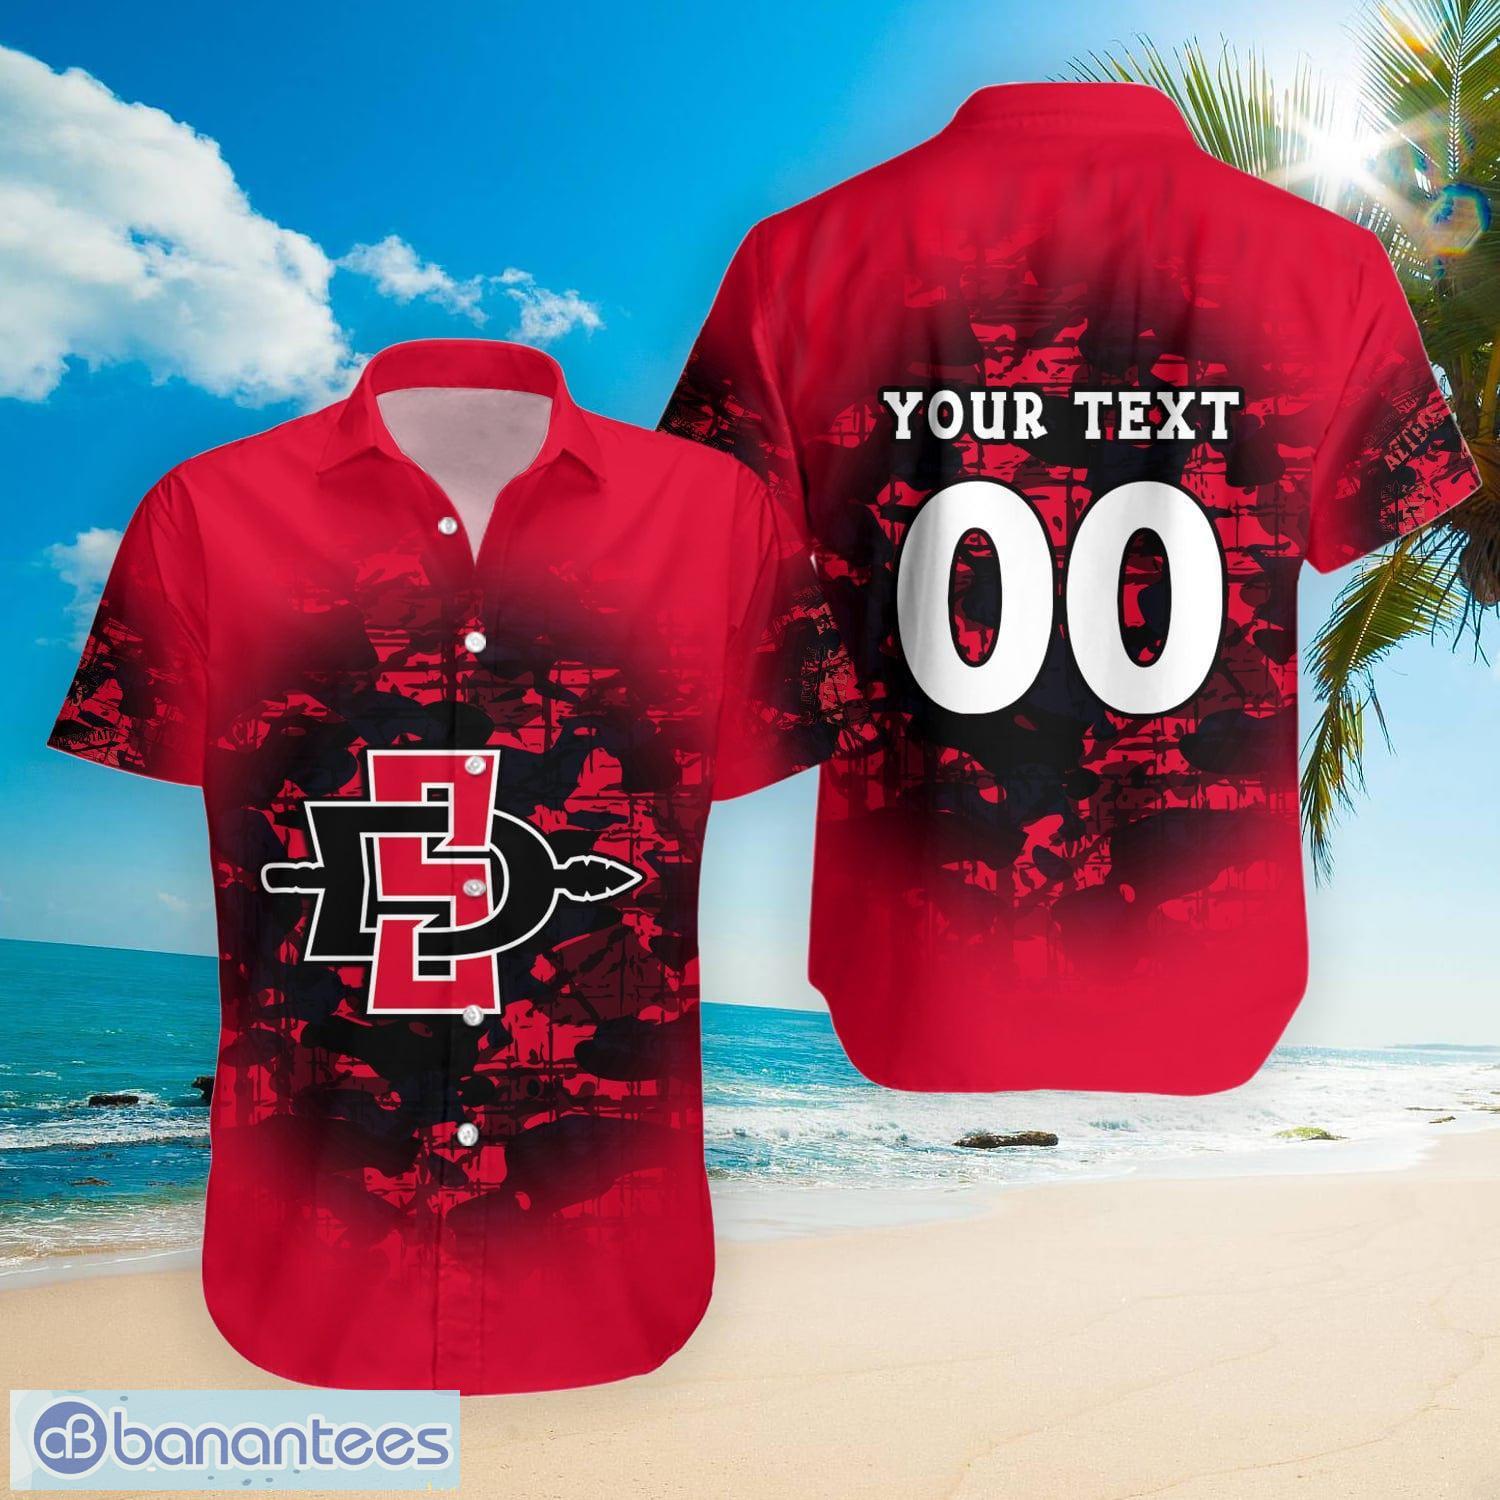 Available] Buy New Custom San Diego State Aztecs Jersey